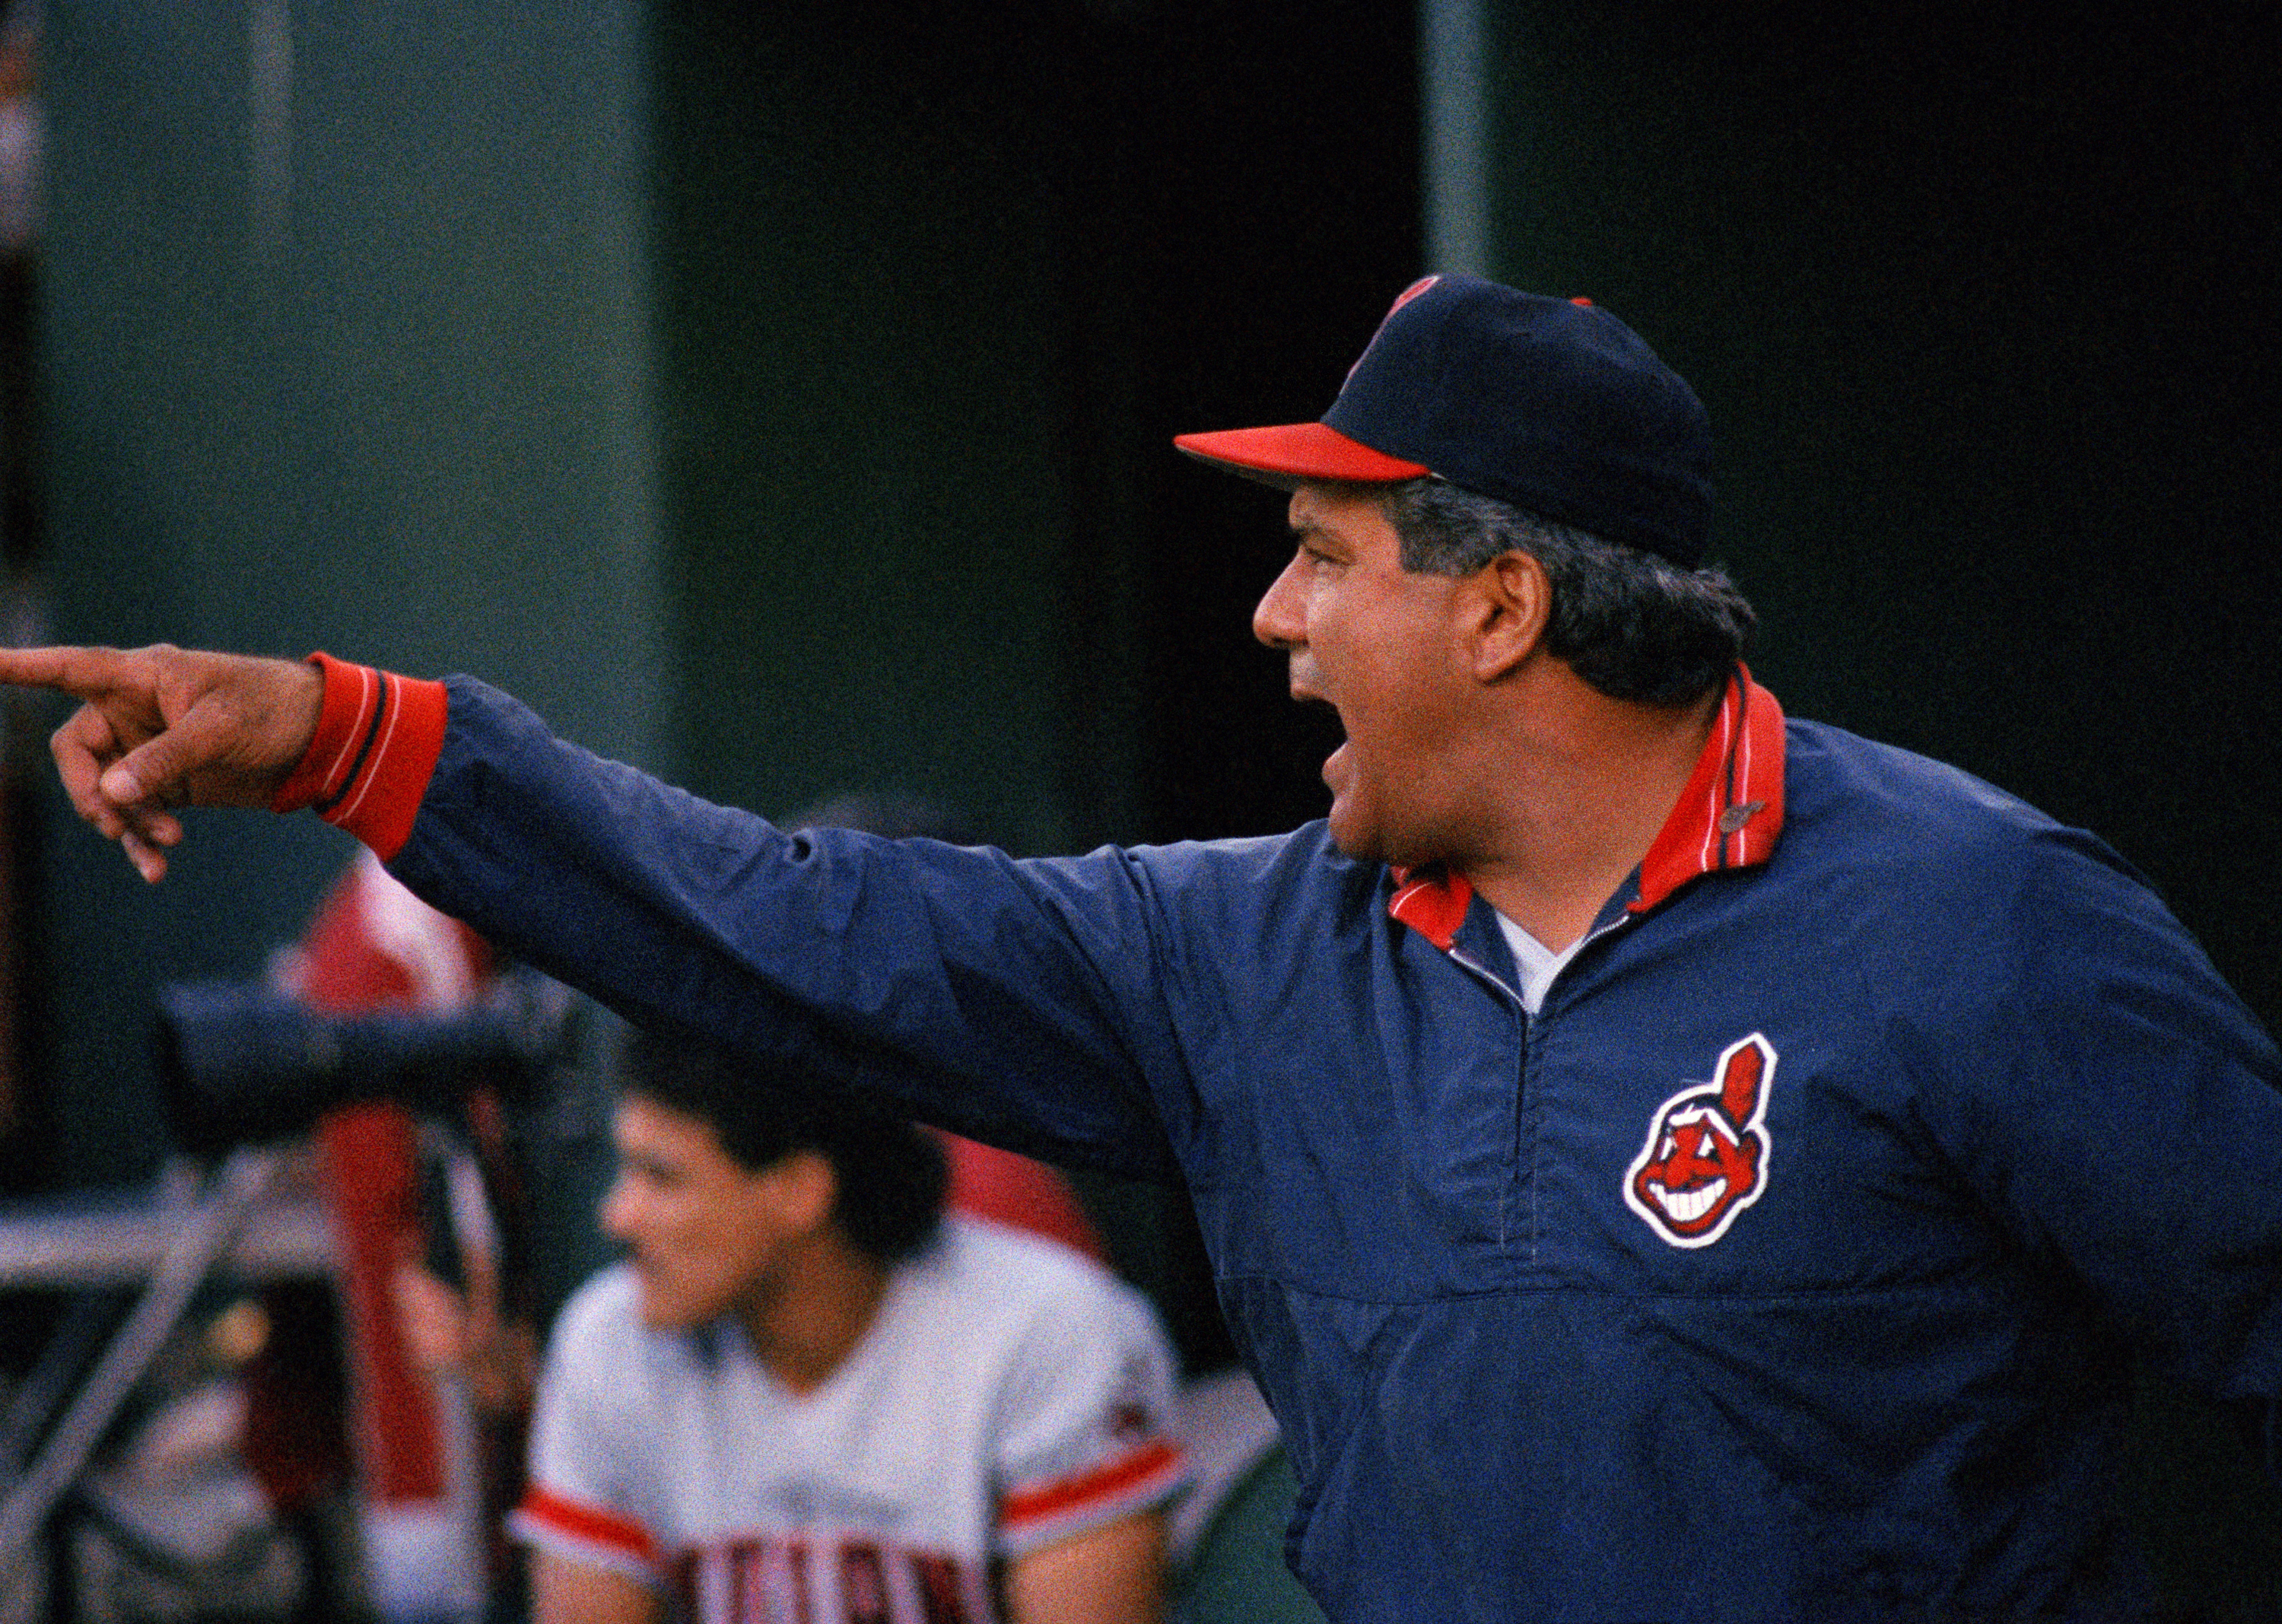 Cleveland Indians 1995 World Series pitcher Jim Poole dies of ALS at 57